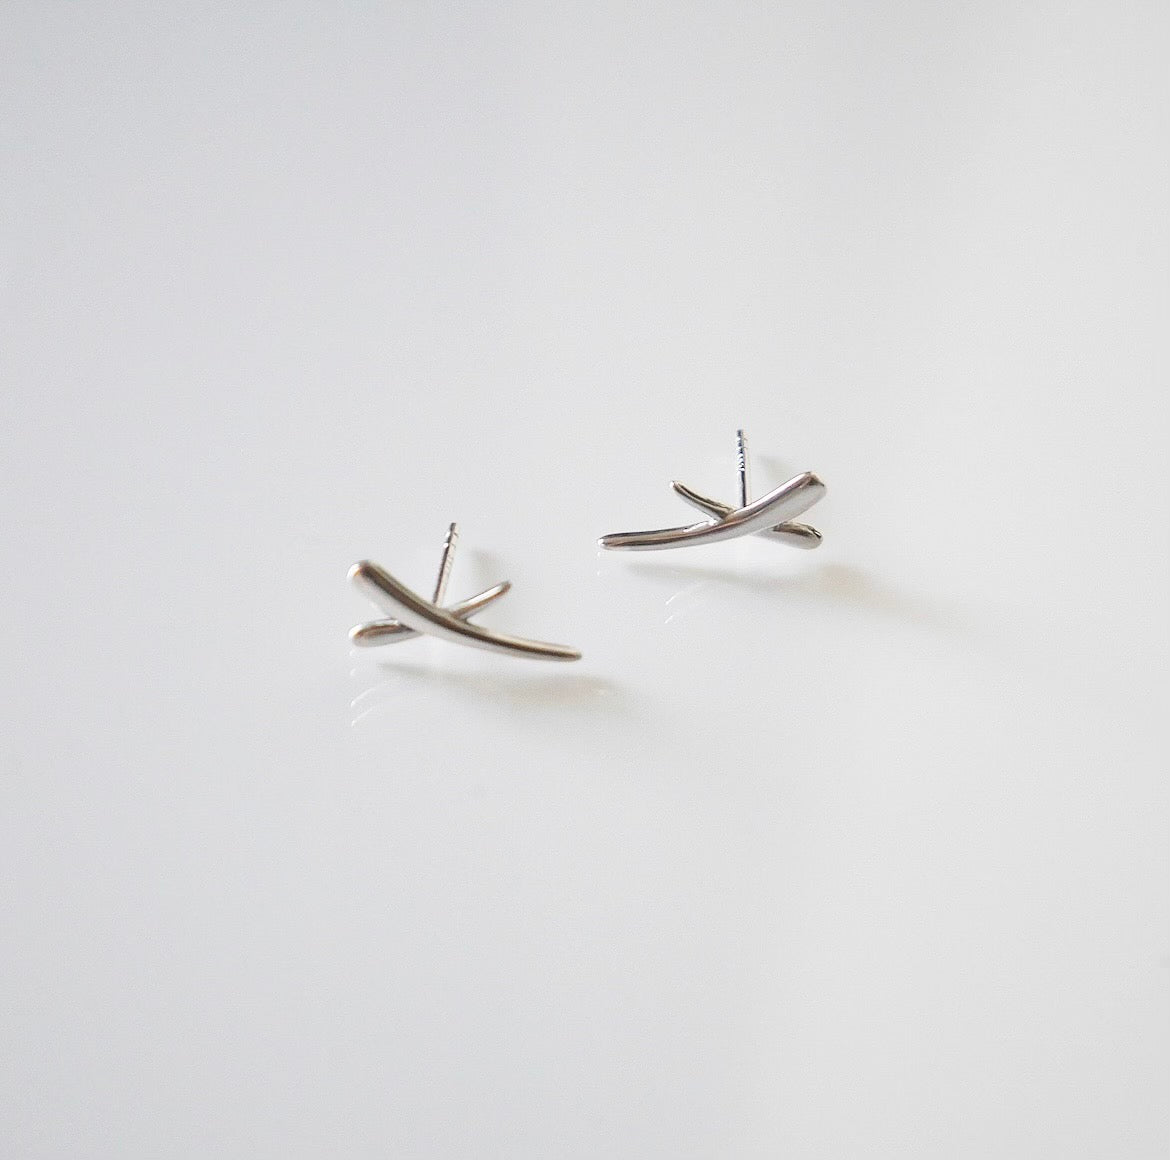 earrings, silver earrings, silver stud earrings, silver jewelry, plain stud earrings, plain earrings, waterproof jewelry, plain stud earrings, nickel free earrings, dainty stud earrings, plain earrings, gifts, birthday gifts, fine jewelry, fashion jewelry, cheap earrings, silver stud earrings, white gold earrings, trending jewelry, kesley jewelry, hypoallergenic earrings, designer jewelry, nice earrings, luxury earrings